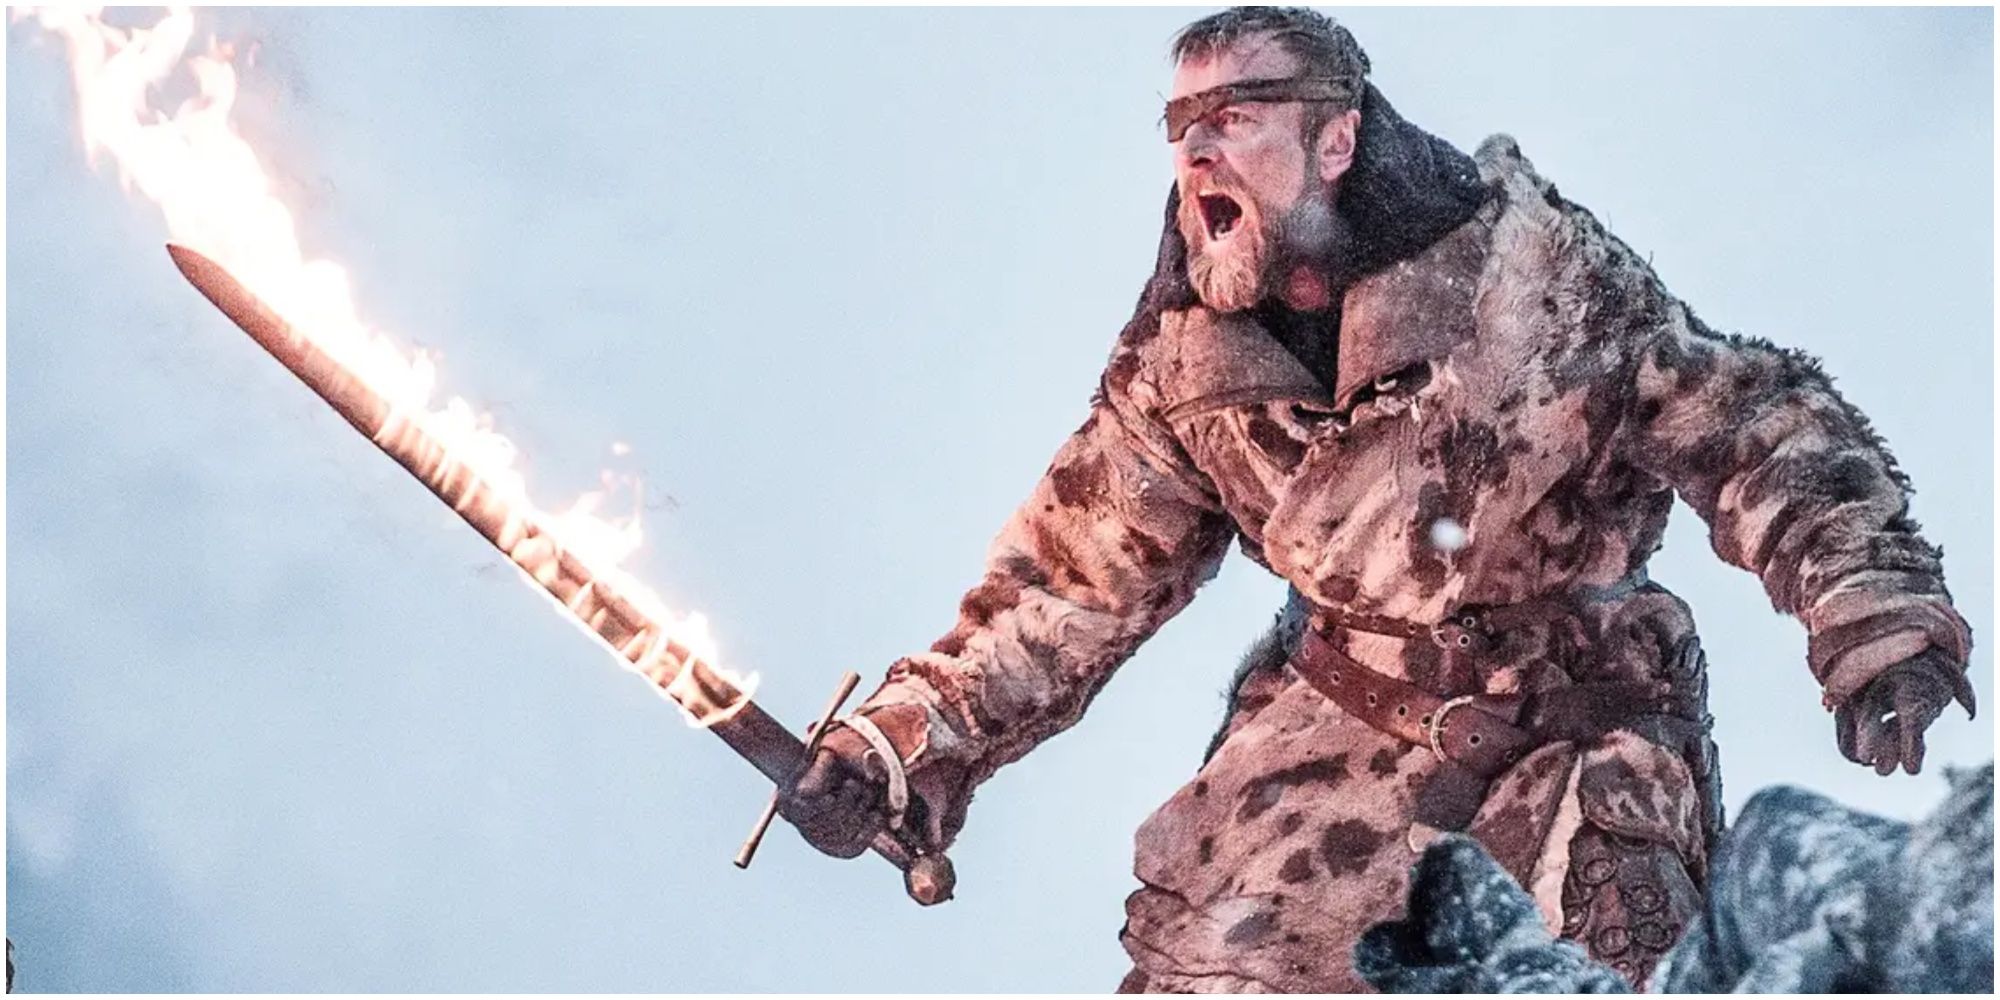 Beric Dondarrion's flaming sword in Game of Thrones.